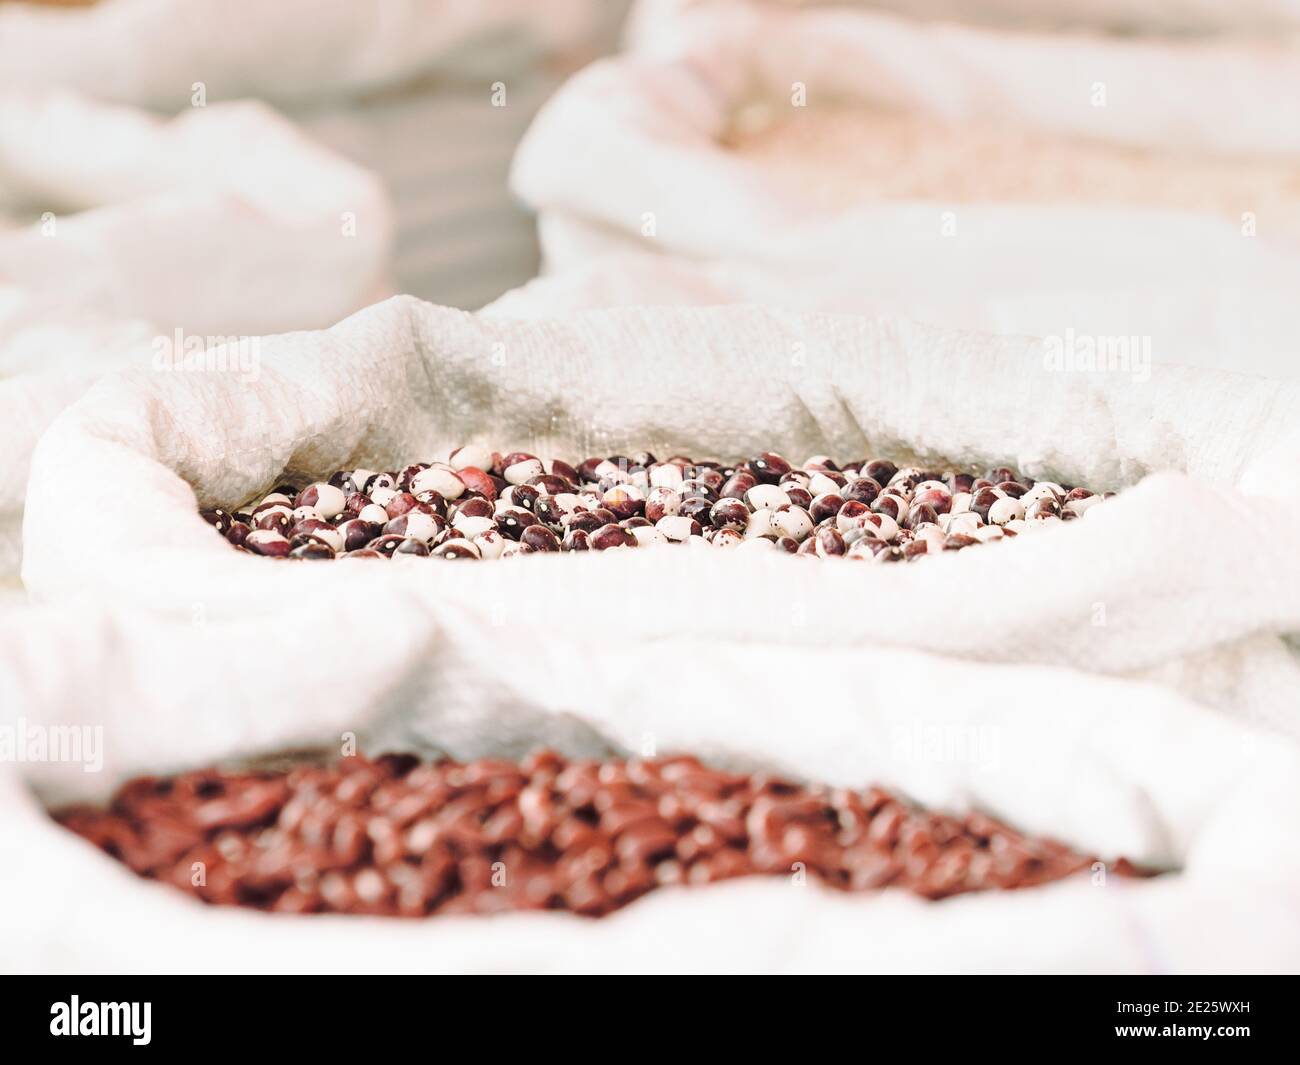 Sacks of legumes in a market stall Stock Photo